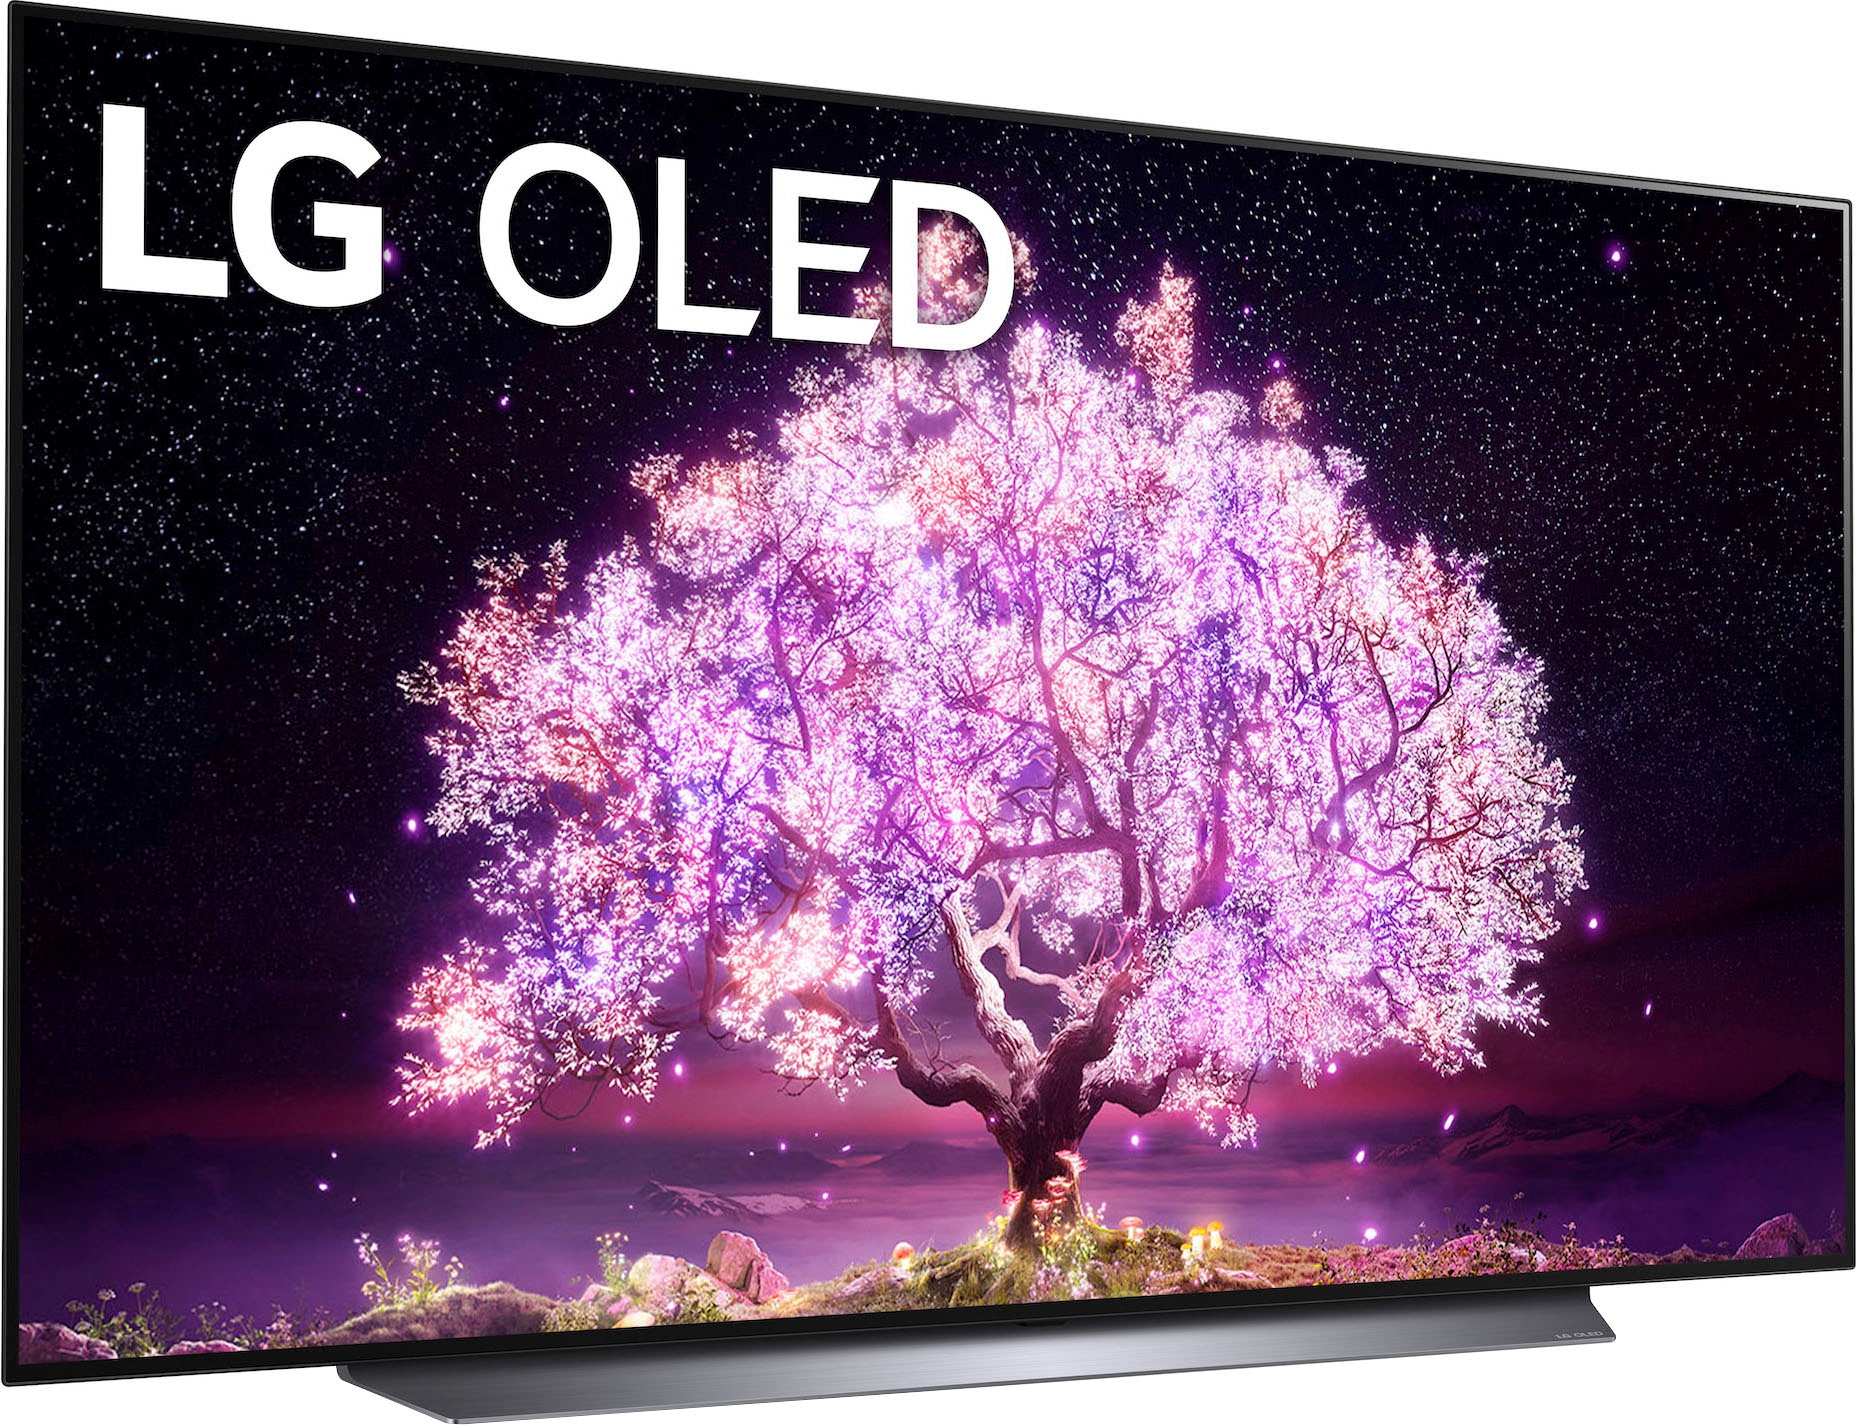 LG OLED-Fernseher »OLED77C17LB«, 195 cm/77 Zoll, 4K Ultra HD, Smart-TV, OLED ,α9 Gen4 4K AI-Prozessor,Dolby Vision & Dolby Atmos jetzt kaufen bei OTTO